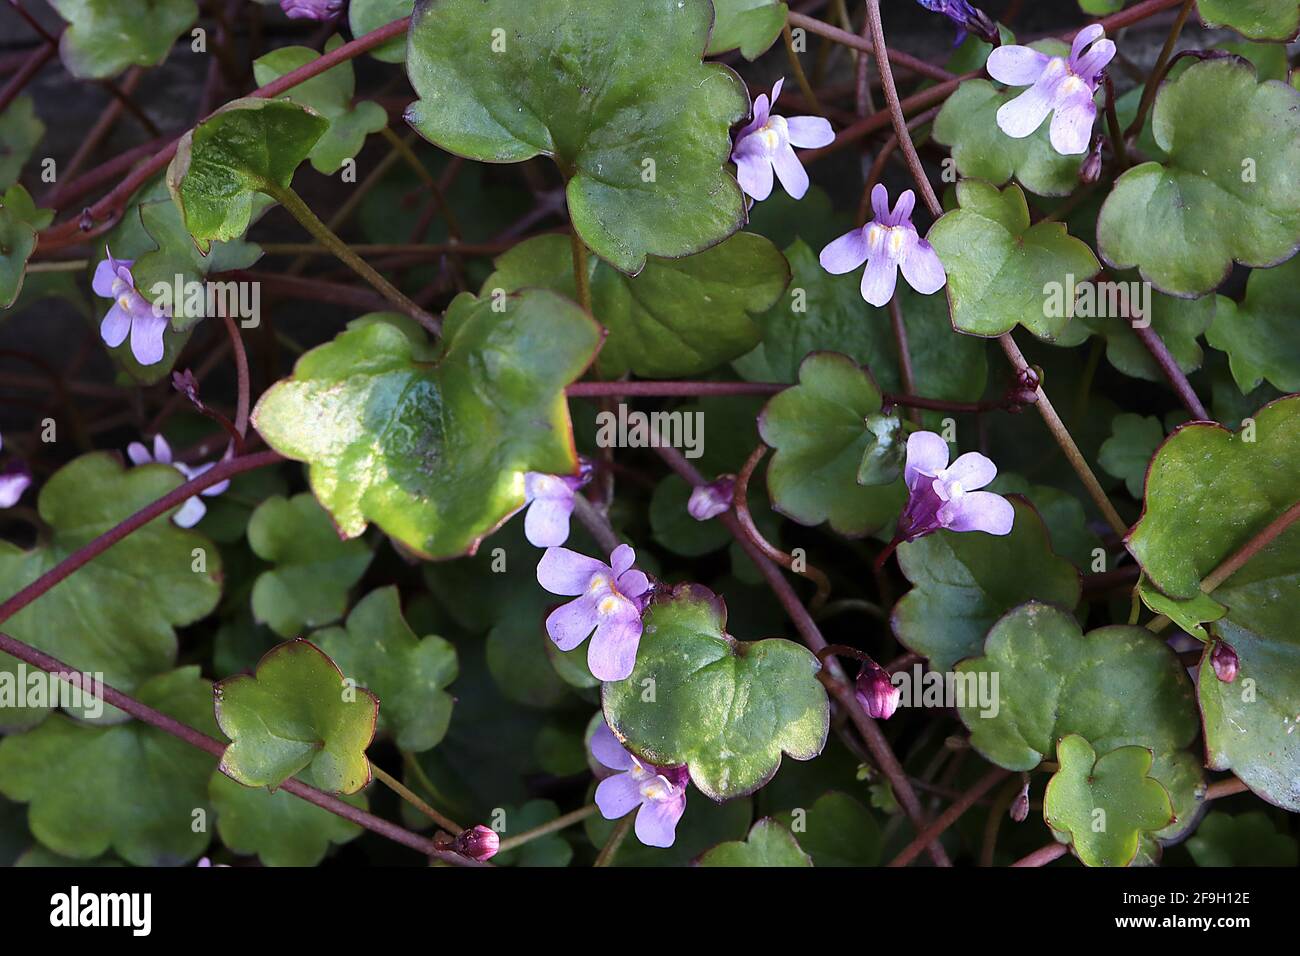 Cymbalaria muralis Ivy-leaved toadflax – mauve two-lipped flowers and green lobed red-edged leaves, April, England, UK Stock Photo